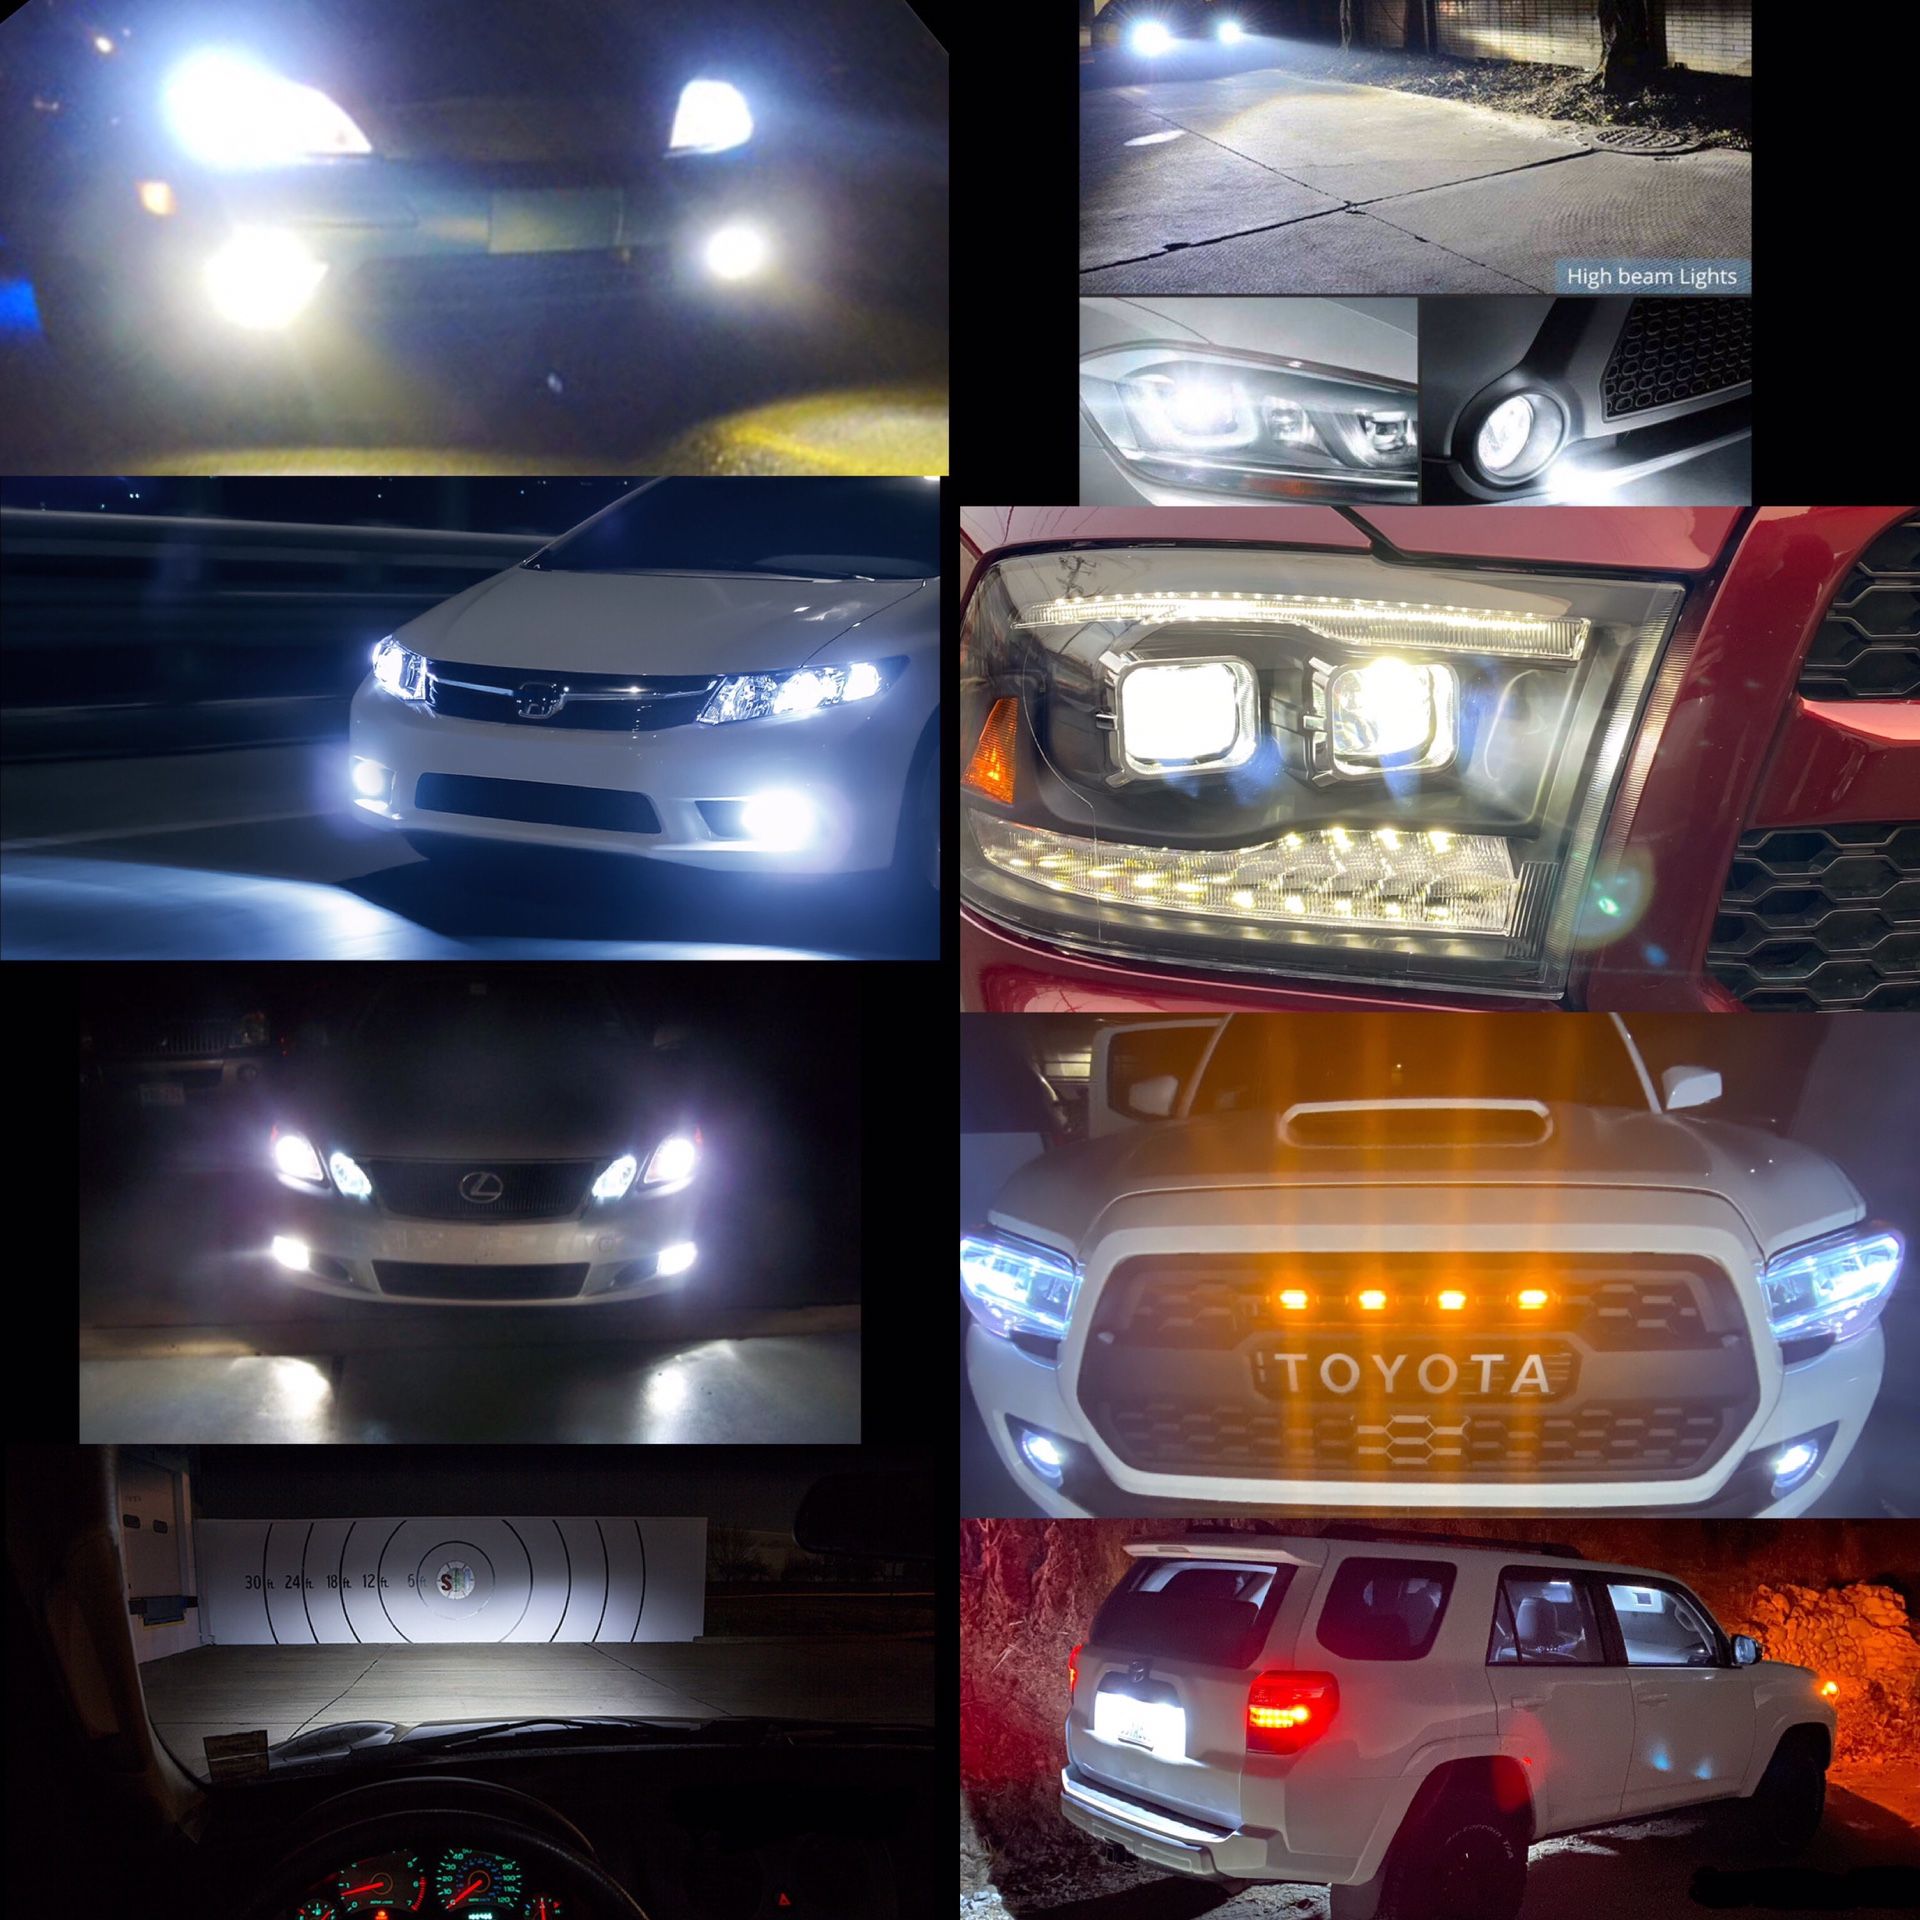 Bright Car LED lights kit For All MODELS LOW BEAM & HIGH BEAM with 2 Year WARRANTY. Easy plug & play Car LED headlights set Luces Led Faros